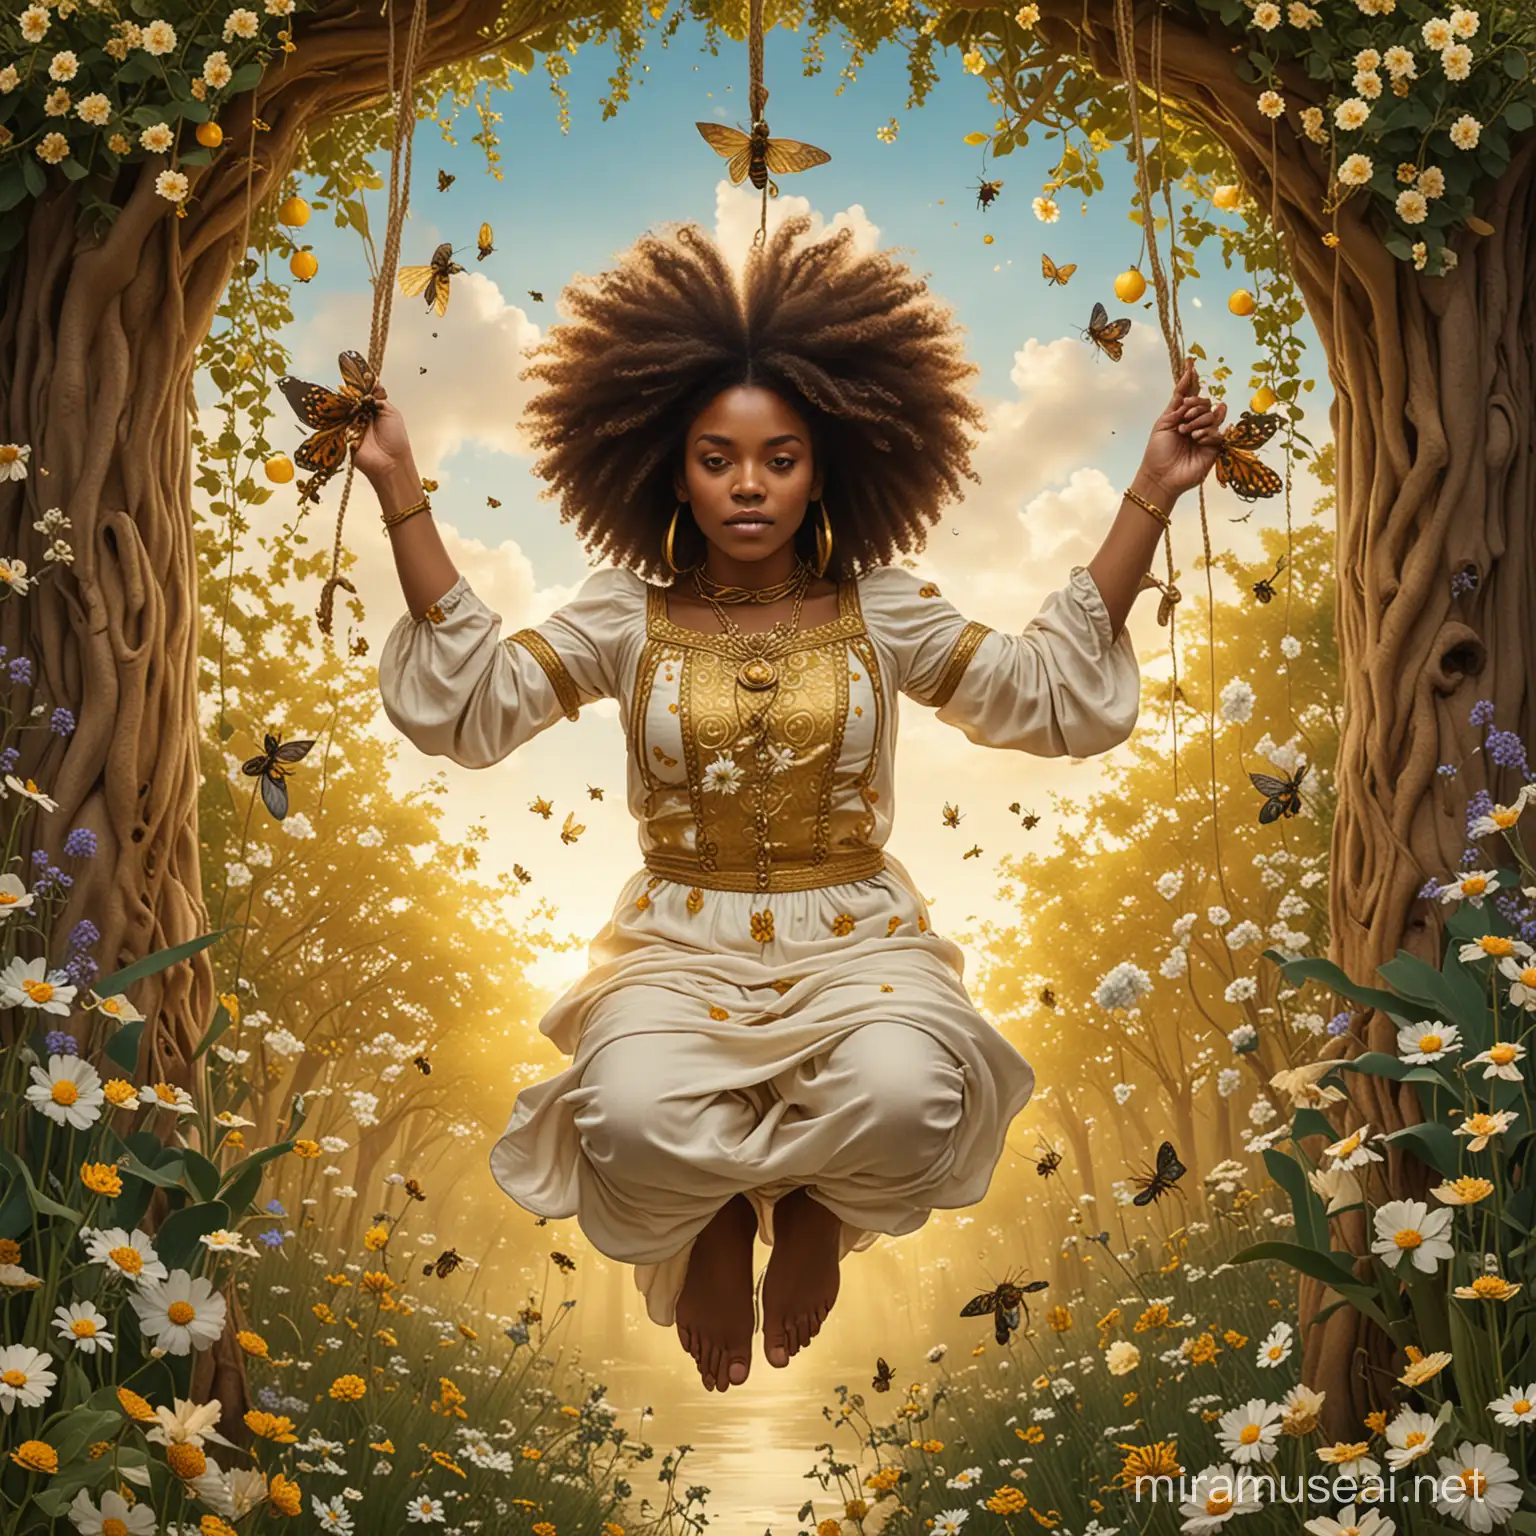 Enchanted AfroIndigenous Woman Bound by Honeycomb in Tarot Card